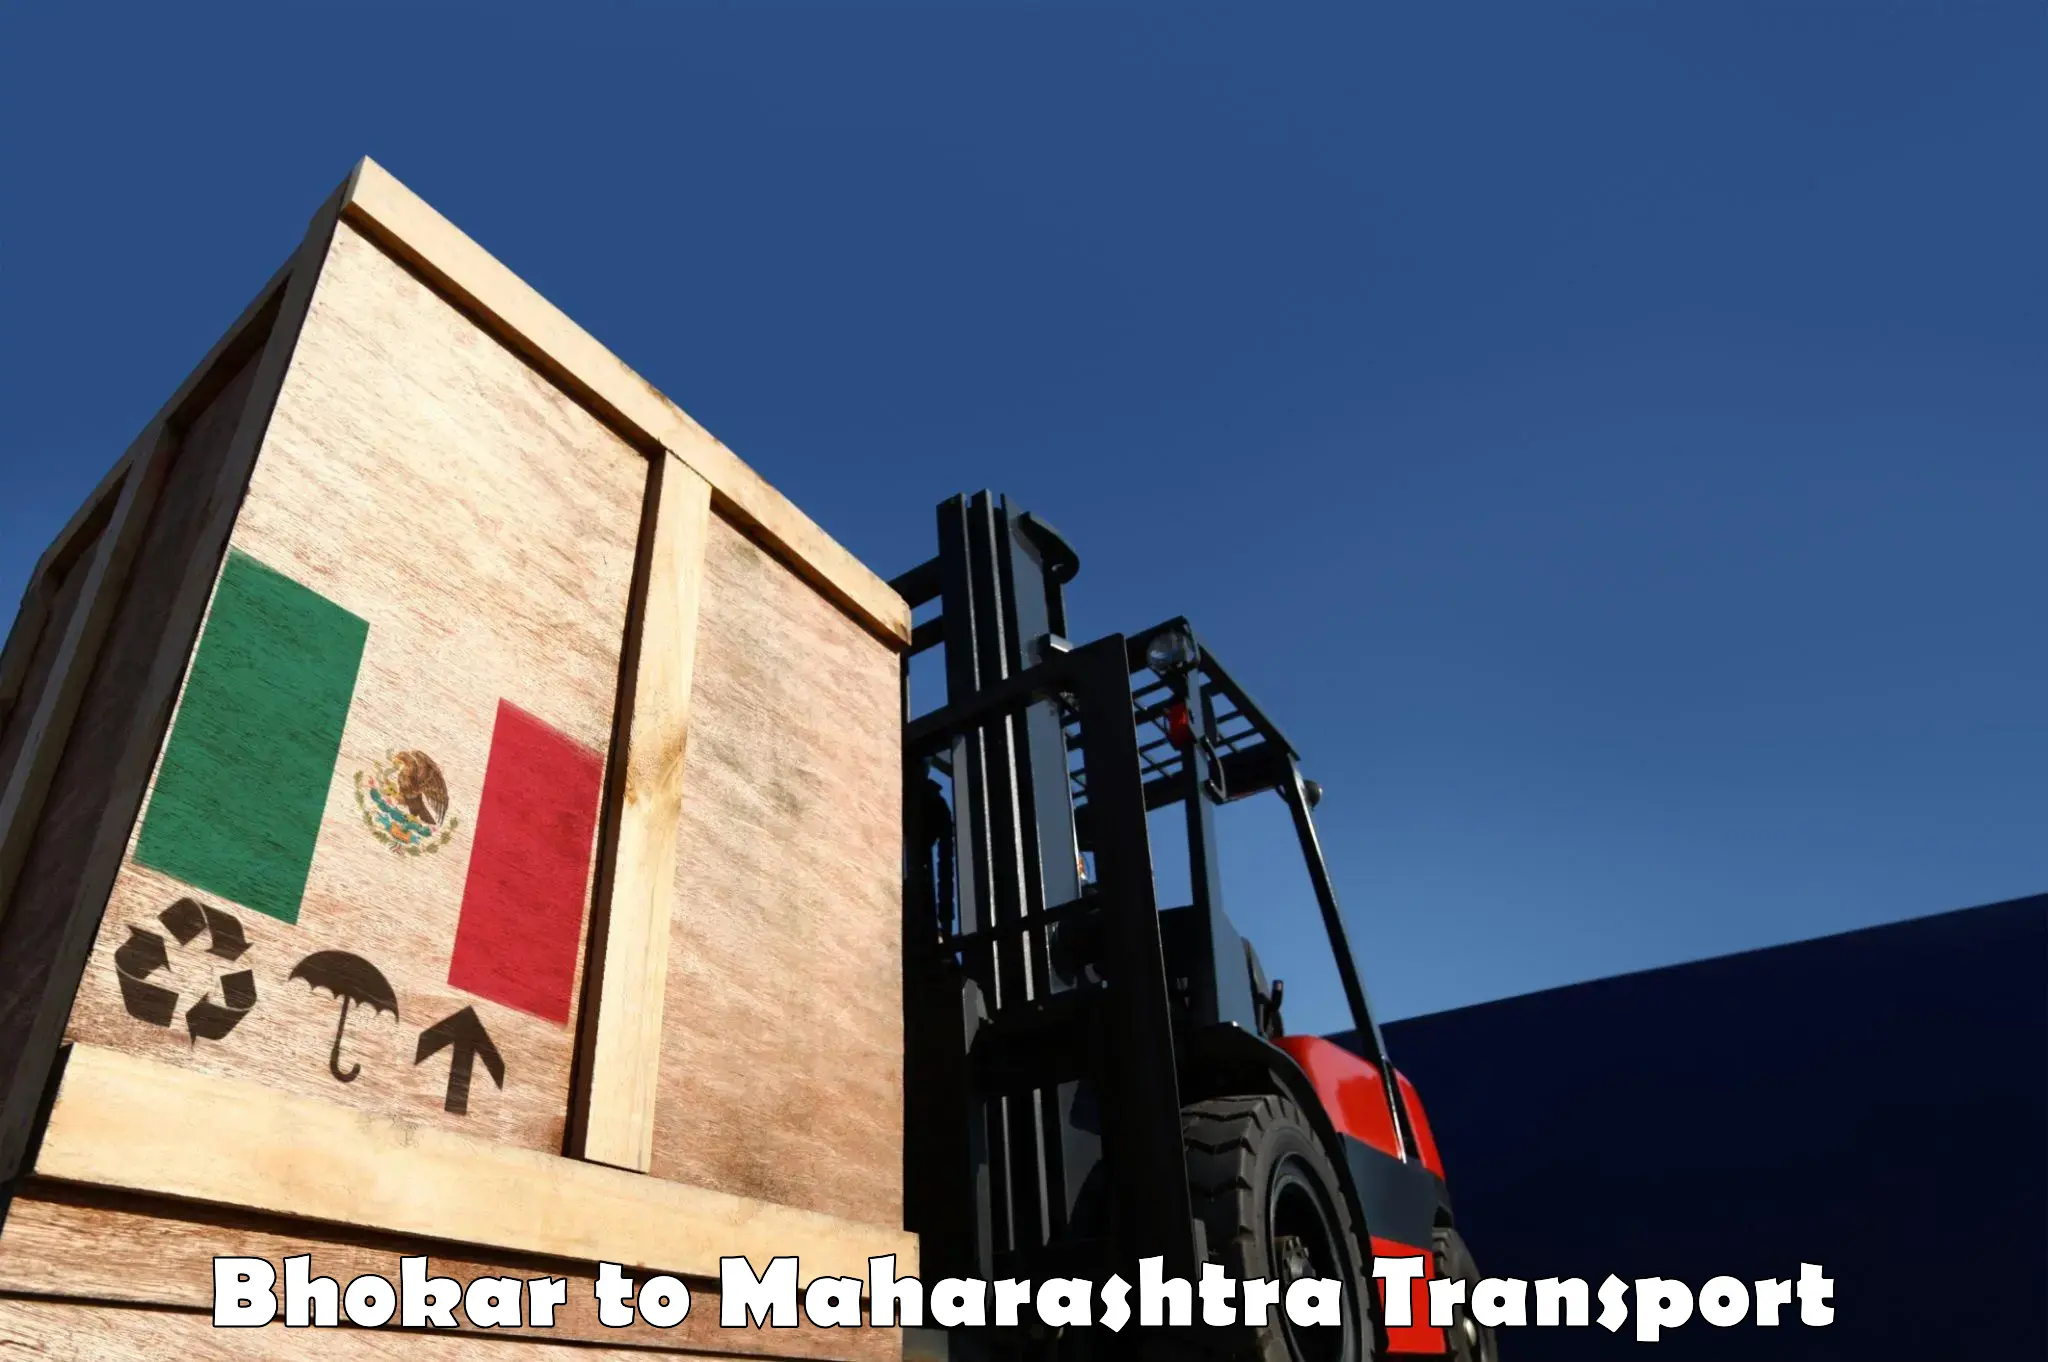 Air freight transport services in Bhokar to Mahim